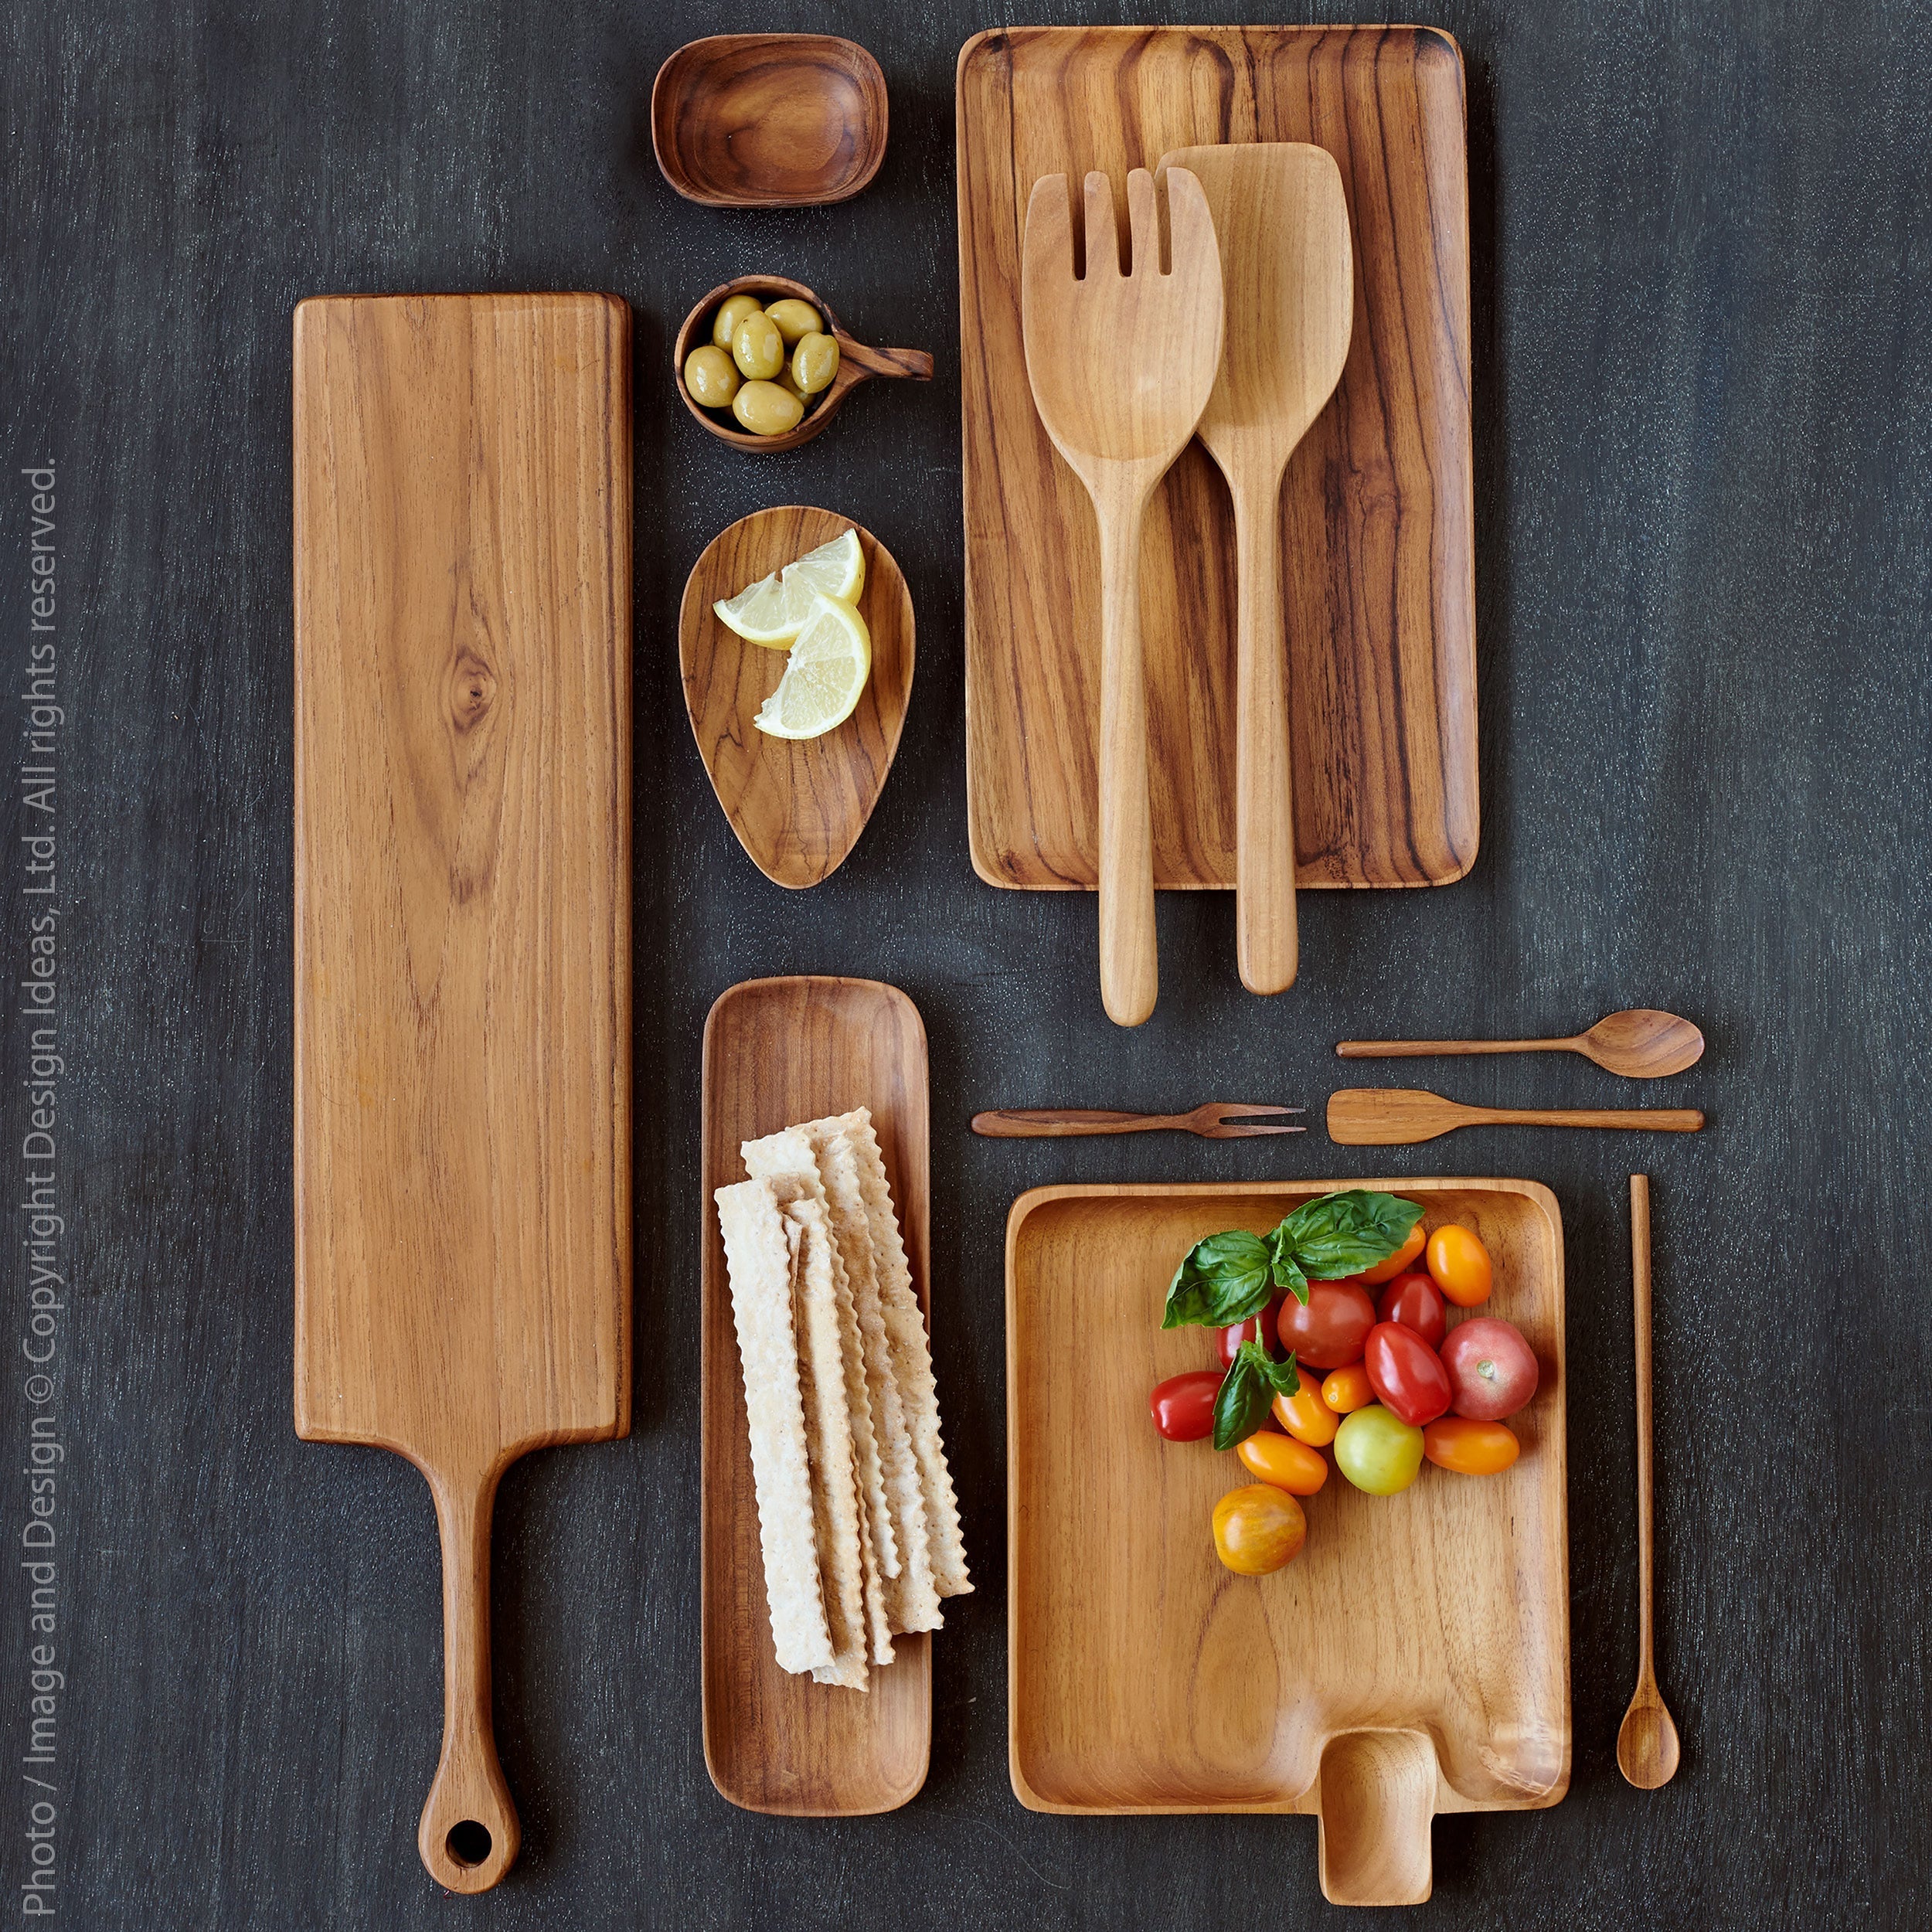 Chiku Teak Serving Tray Natural Color | Image 2 | From the Chiku Collection | Skillfully assembled with natural teak for long lasting use | This tray is sustainably sourced | Available in natural color | texxture home